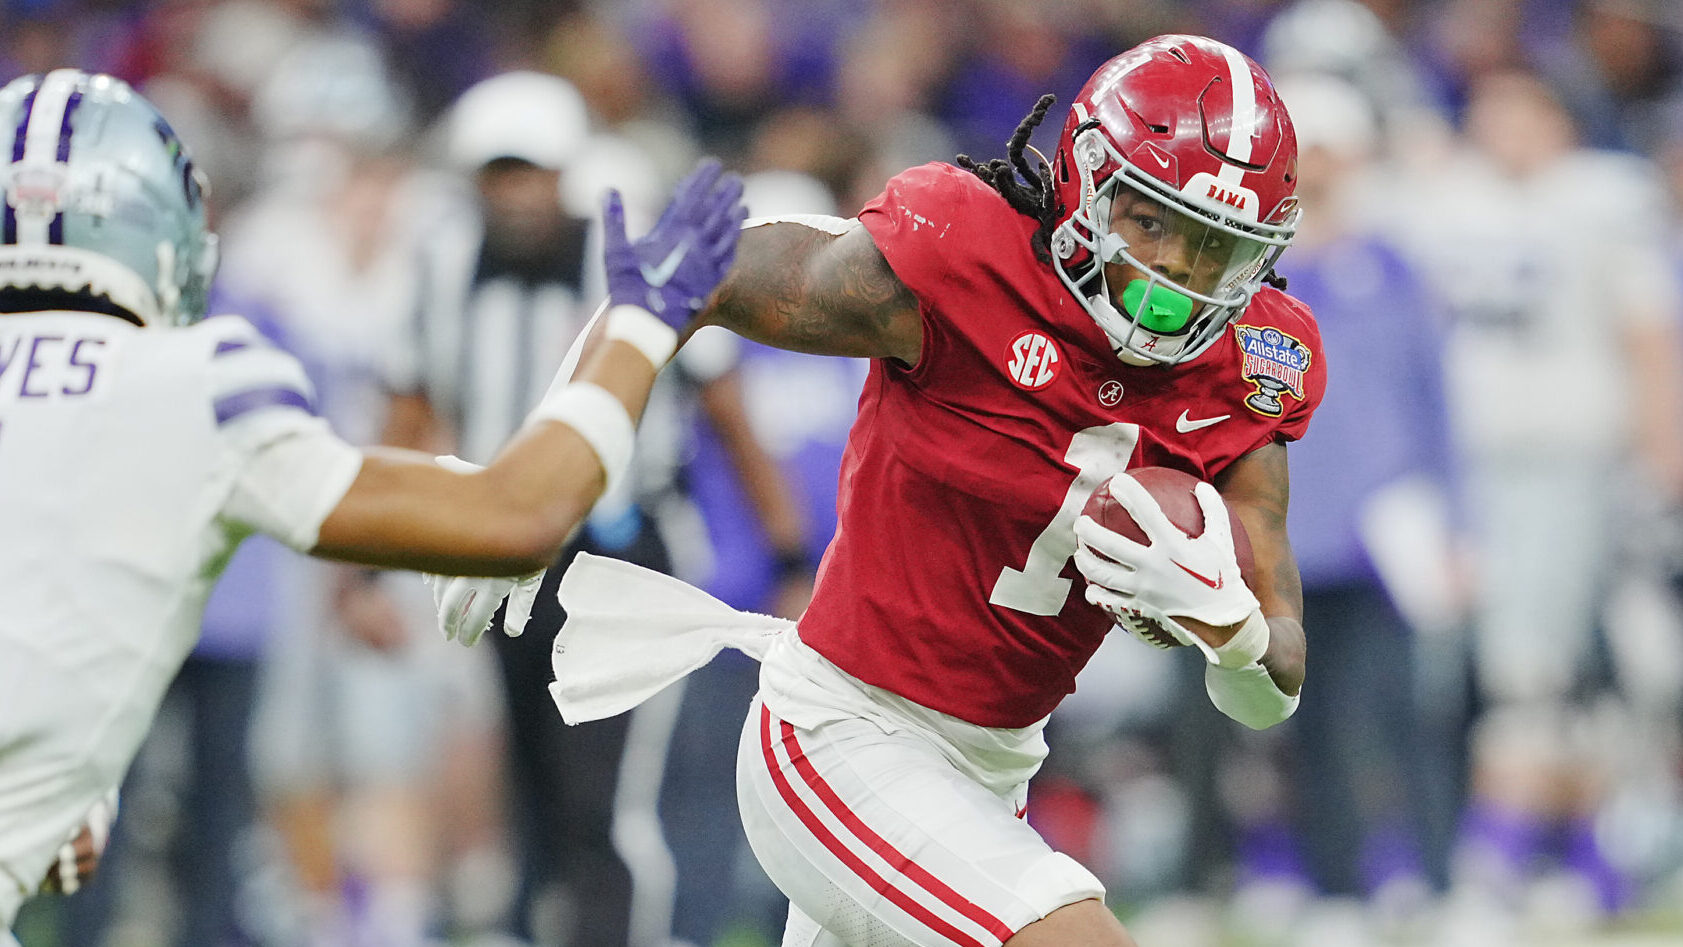 2023 NFL Combine: Previewing RB, OL Workouts